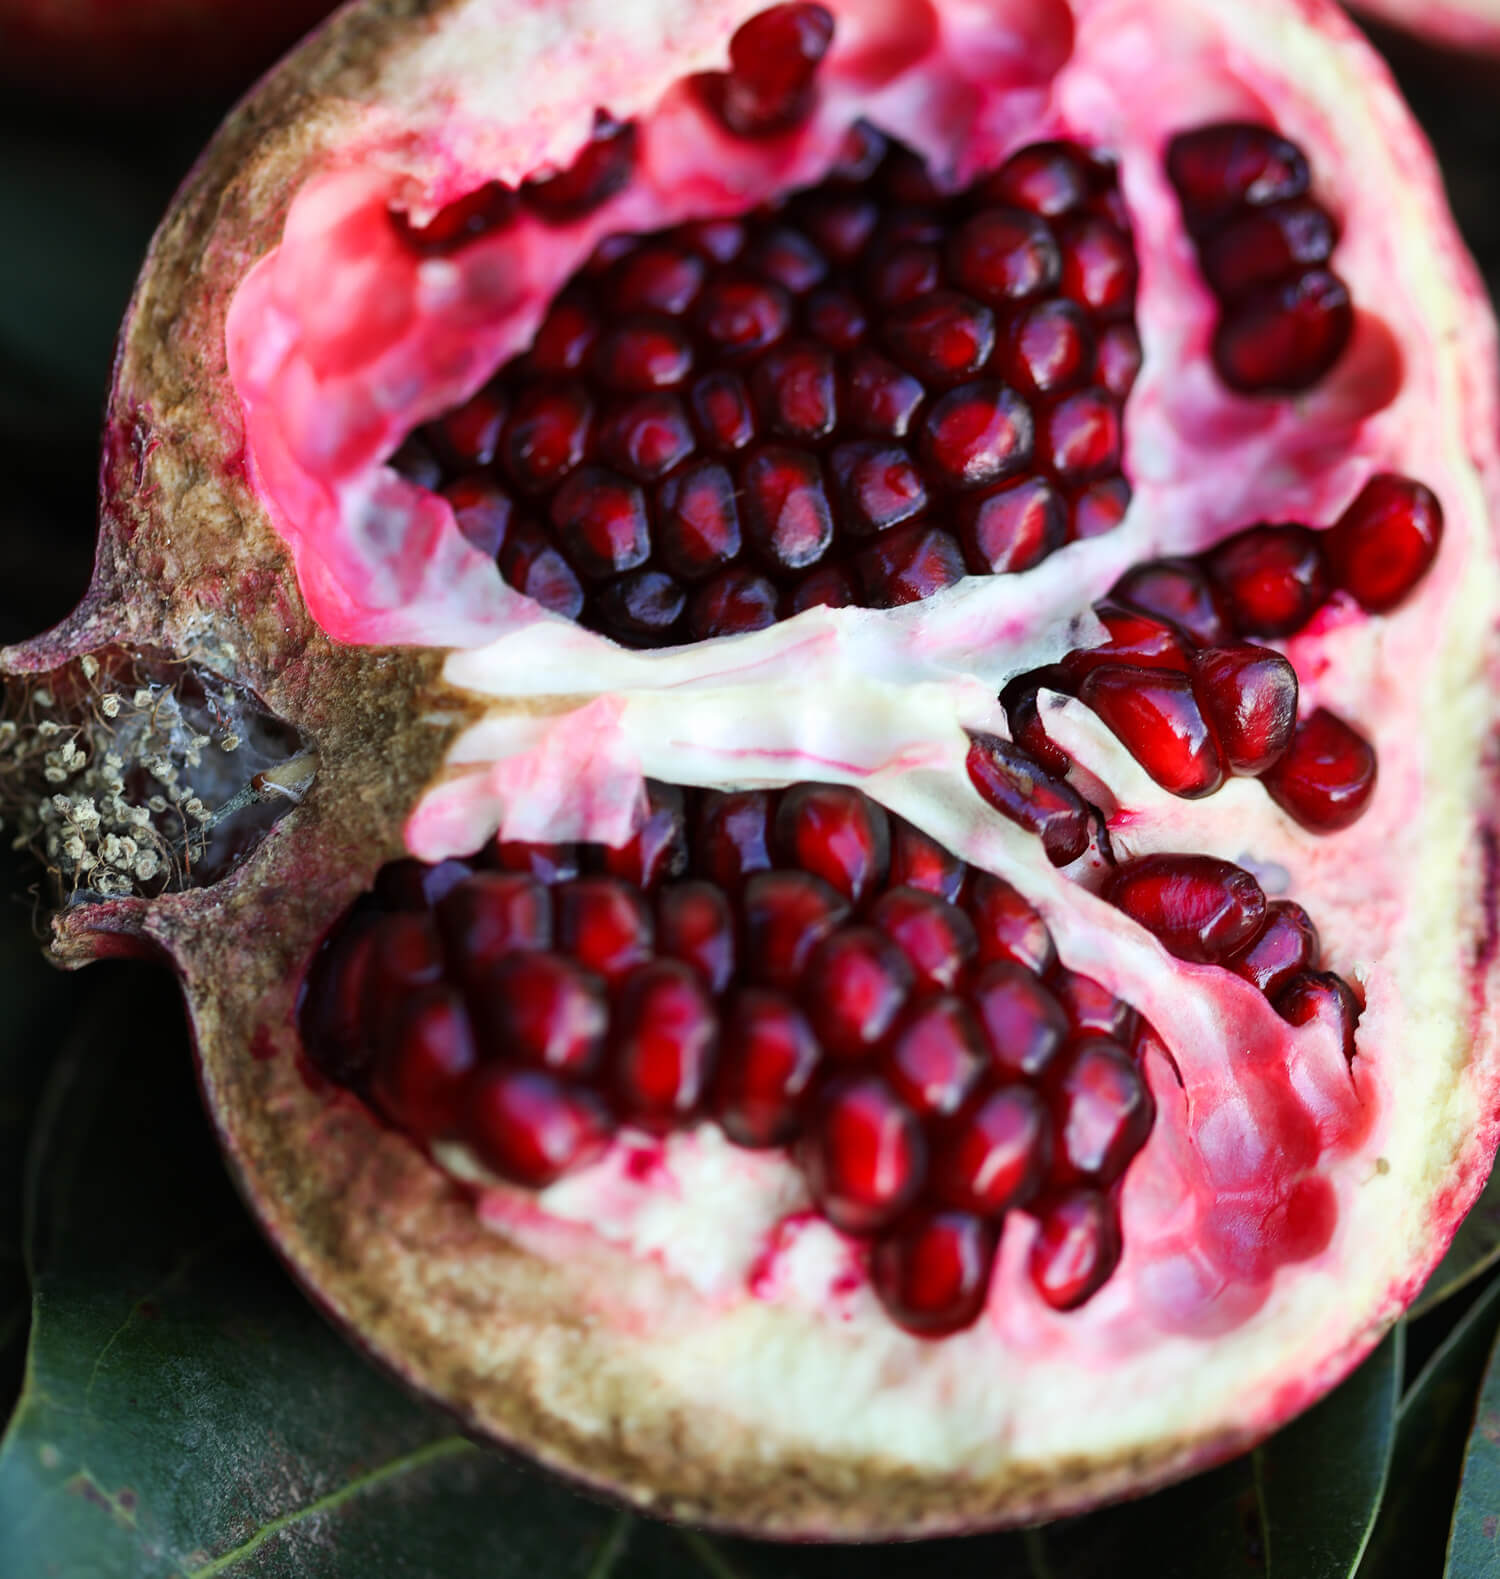 Pomegranate: A Powerful Antioxidant Behind the Unmistakable Retrouvé Radiance